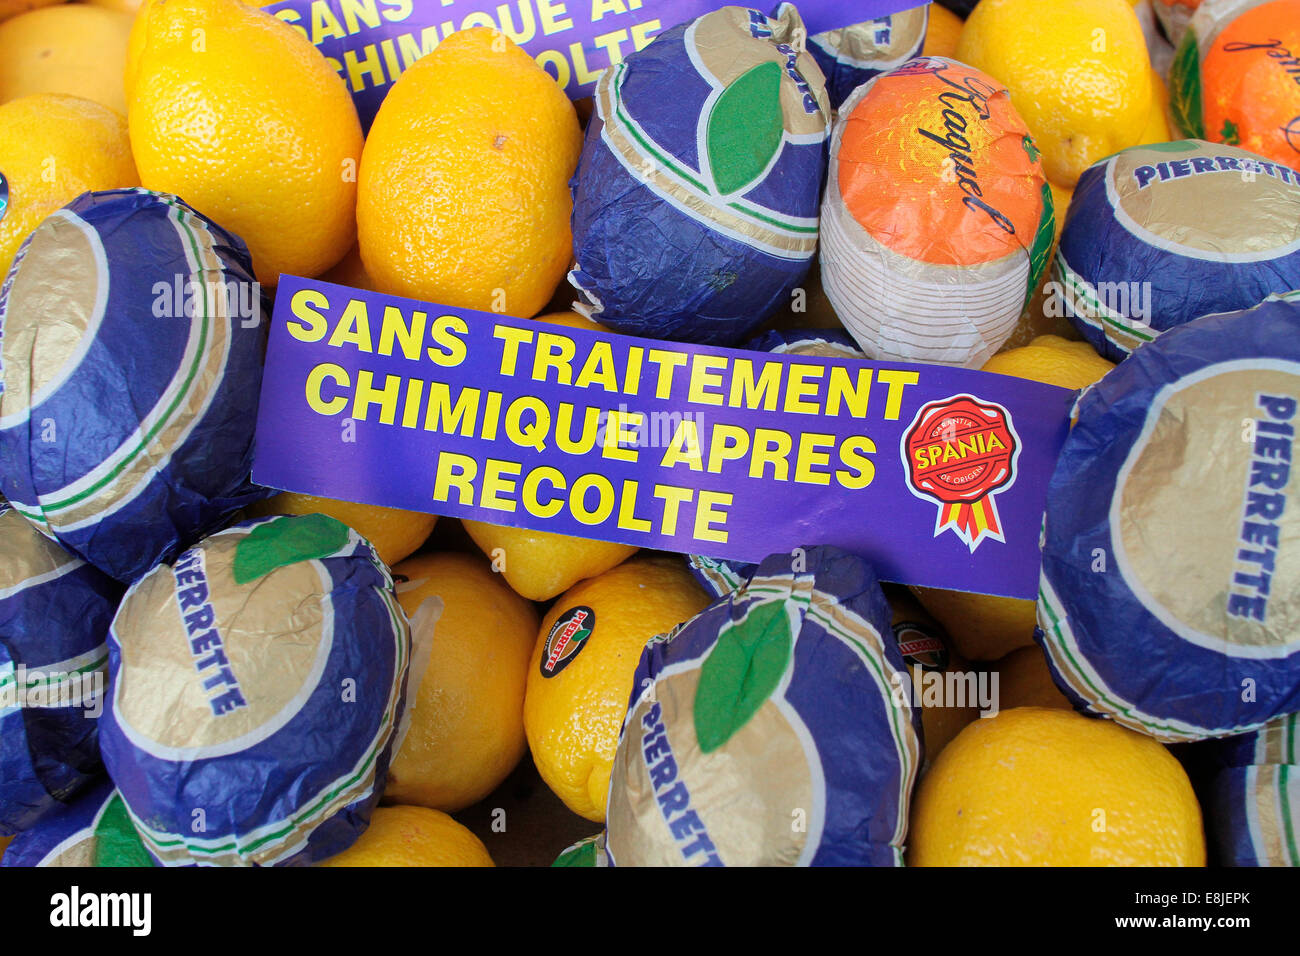 Labels on Spania lemons 'without chemical treatment after harvest.' Stock Photo